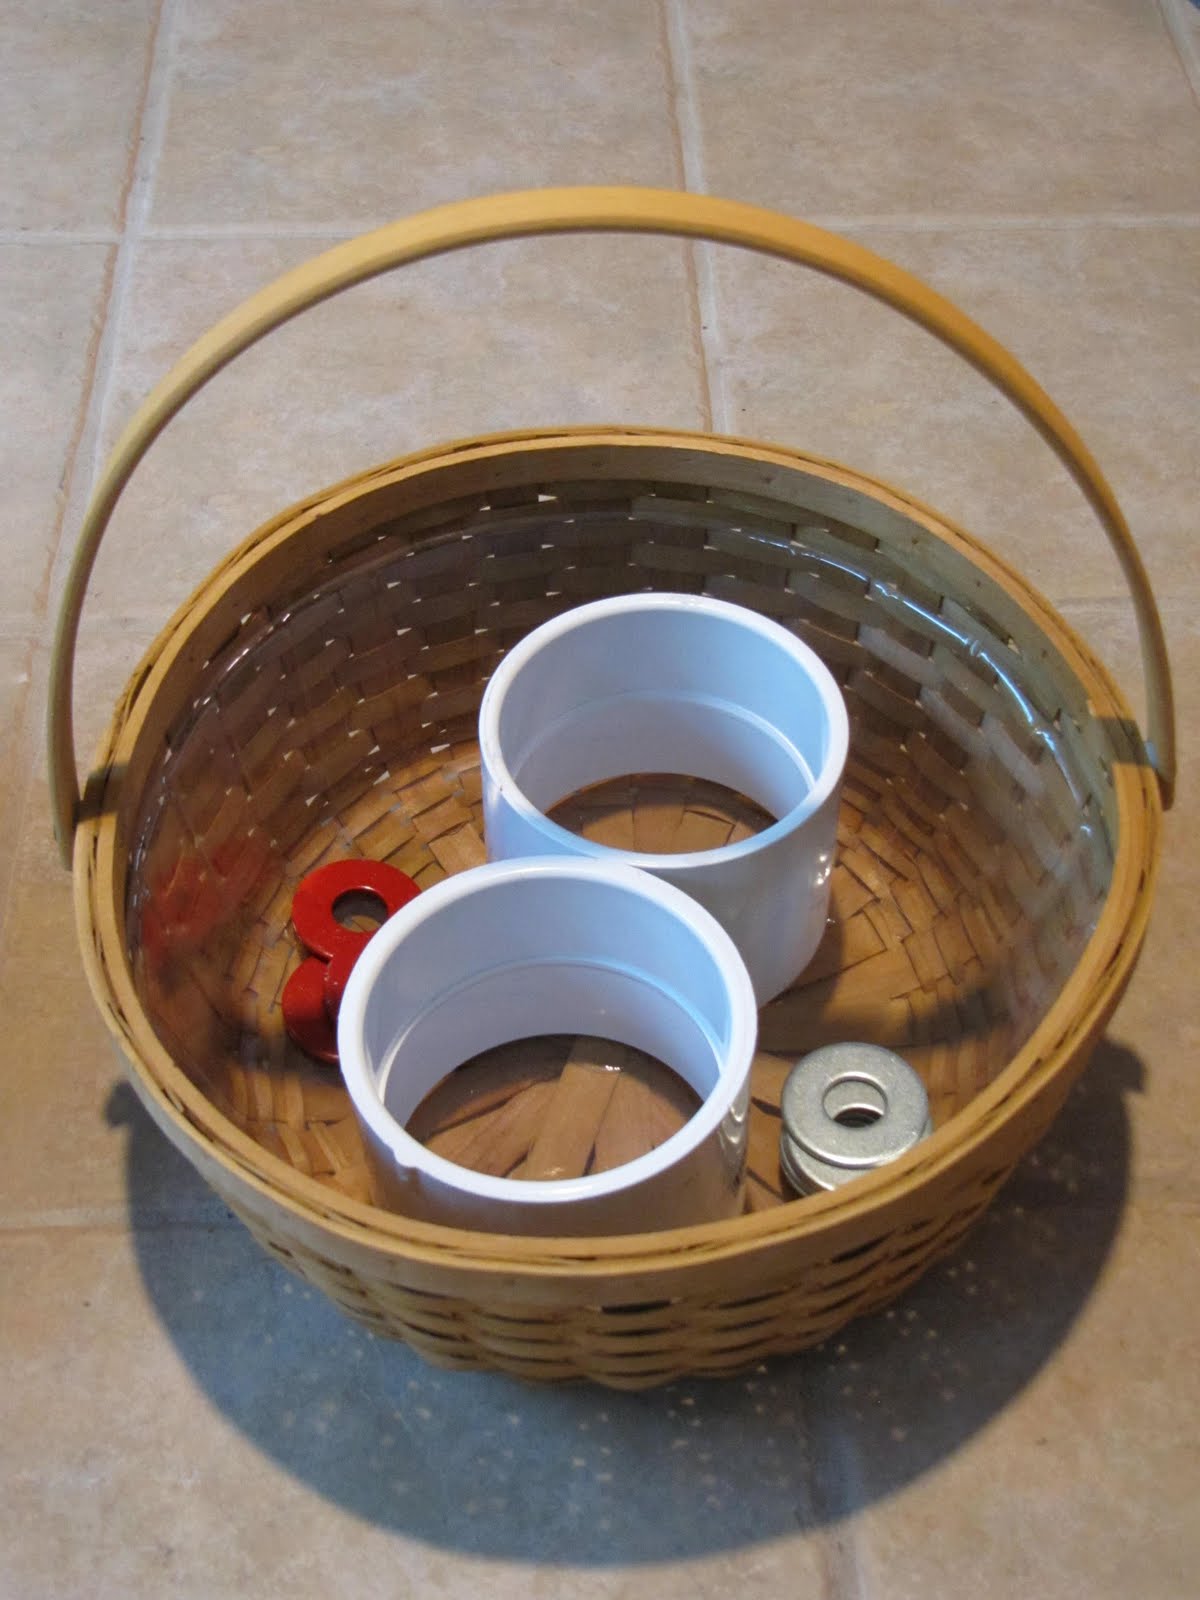 Sew Many Ways...: Tool Time Tuesday...Washer Toss Game